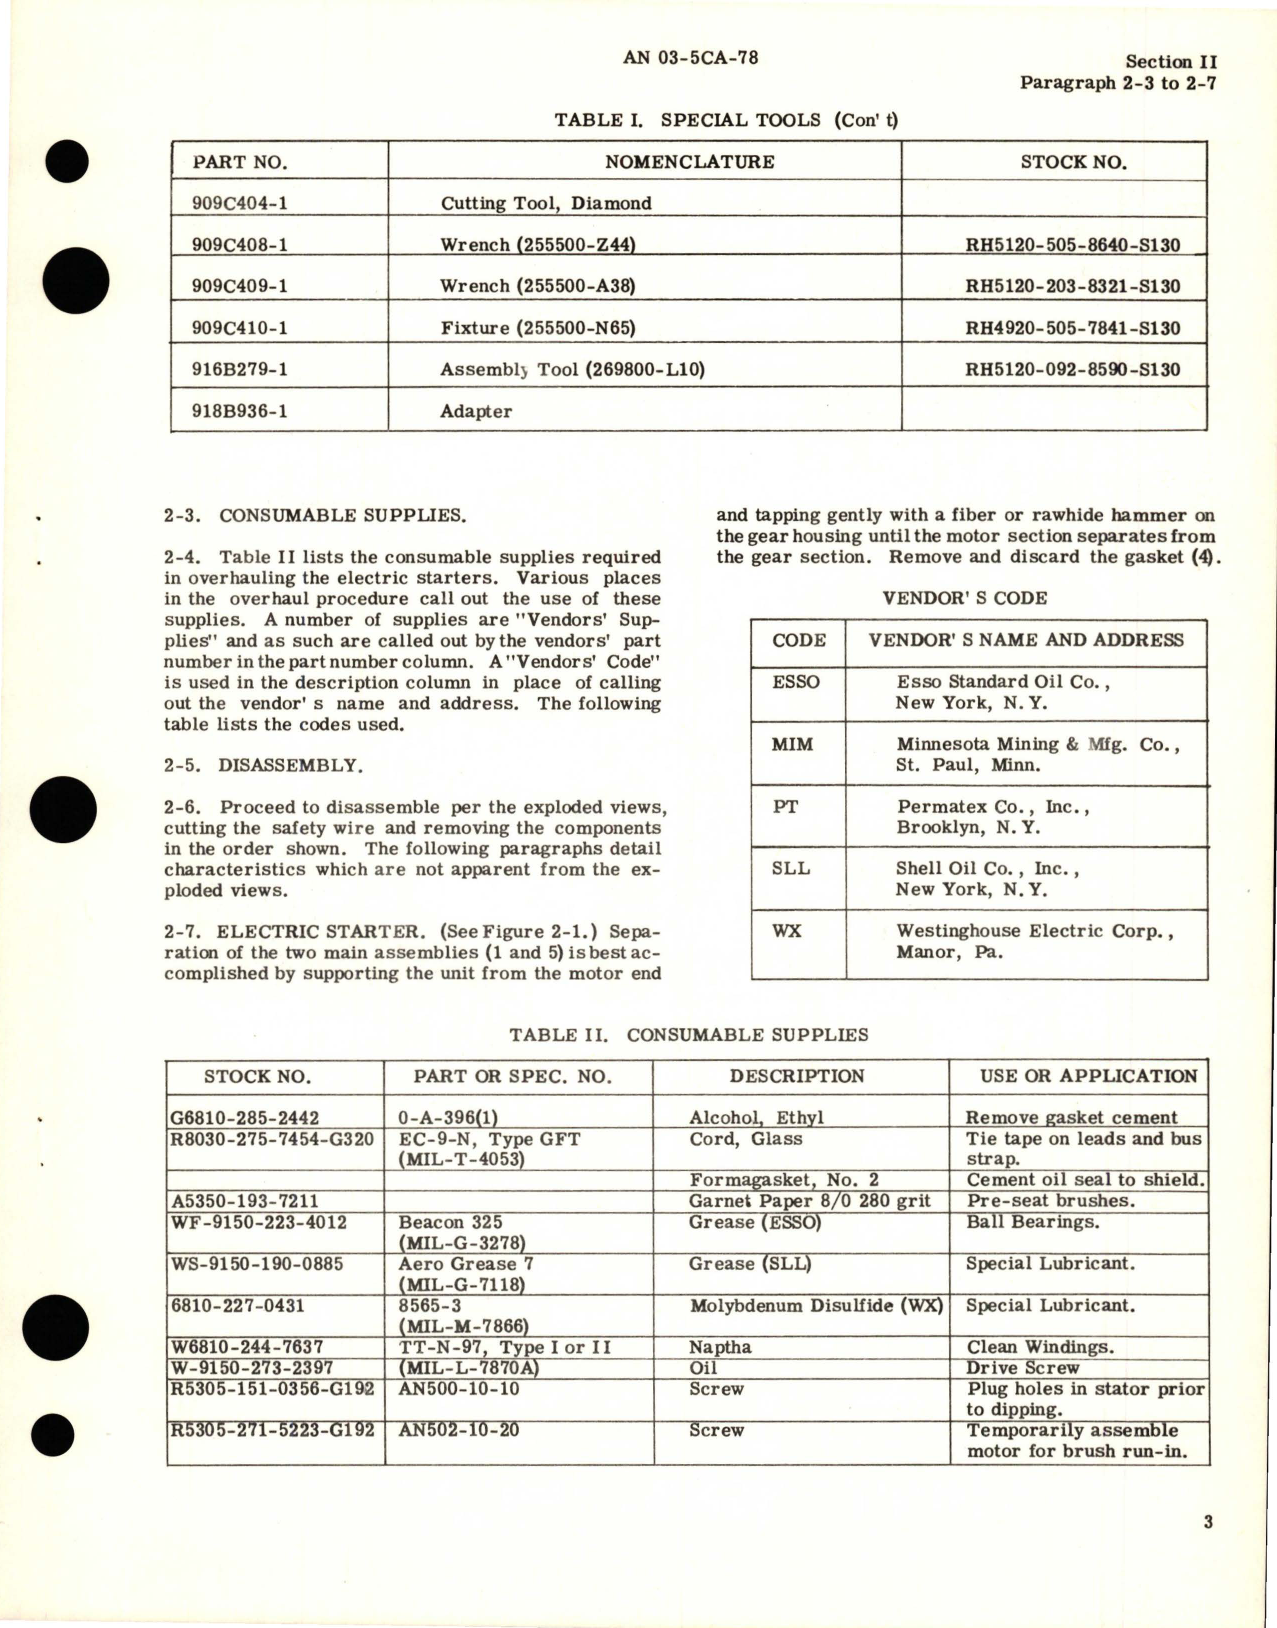 Sample page 5 from AirCorps Library document: Overhaul Instructions for Electric Starters (Gas Turbine Engines J34-WE-34, J34-WE-36) - Models A28A8544, A28A8544A 